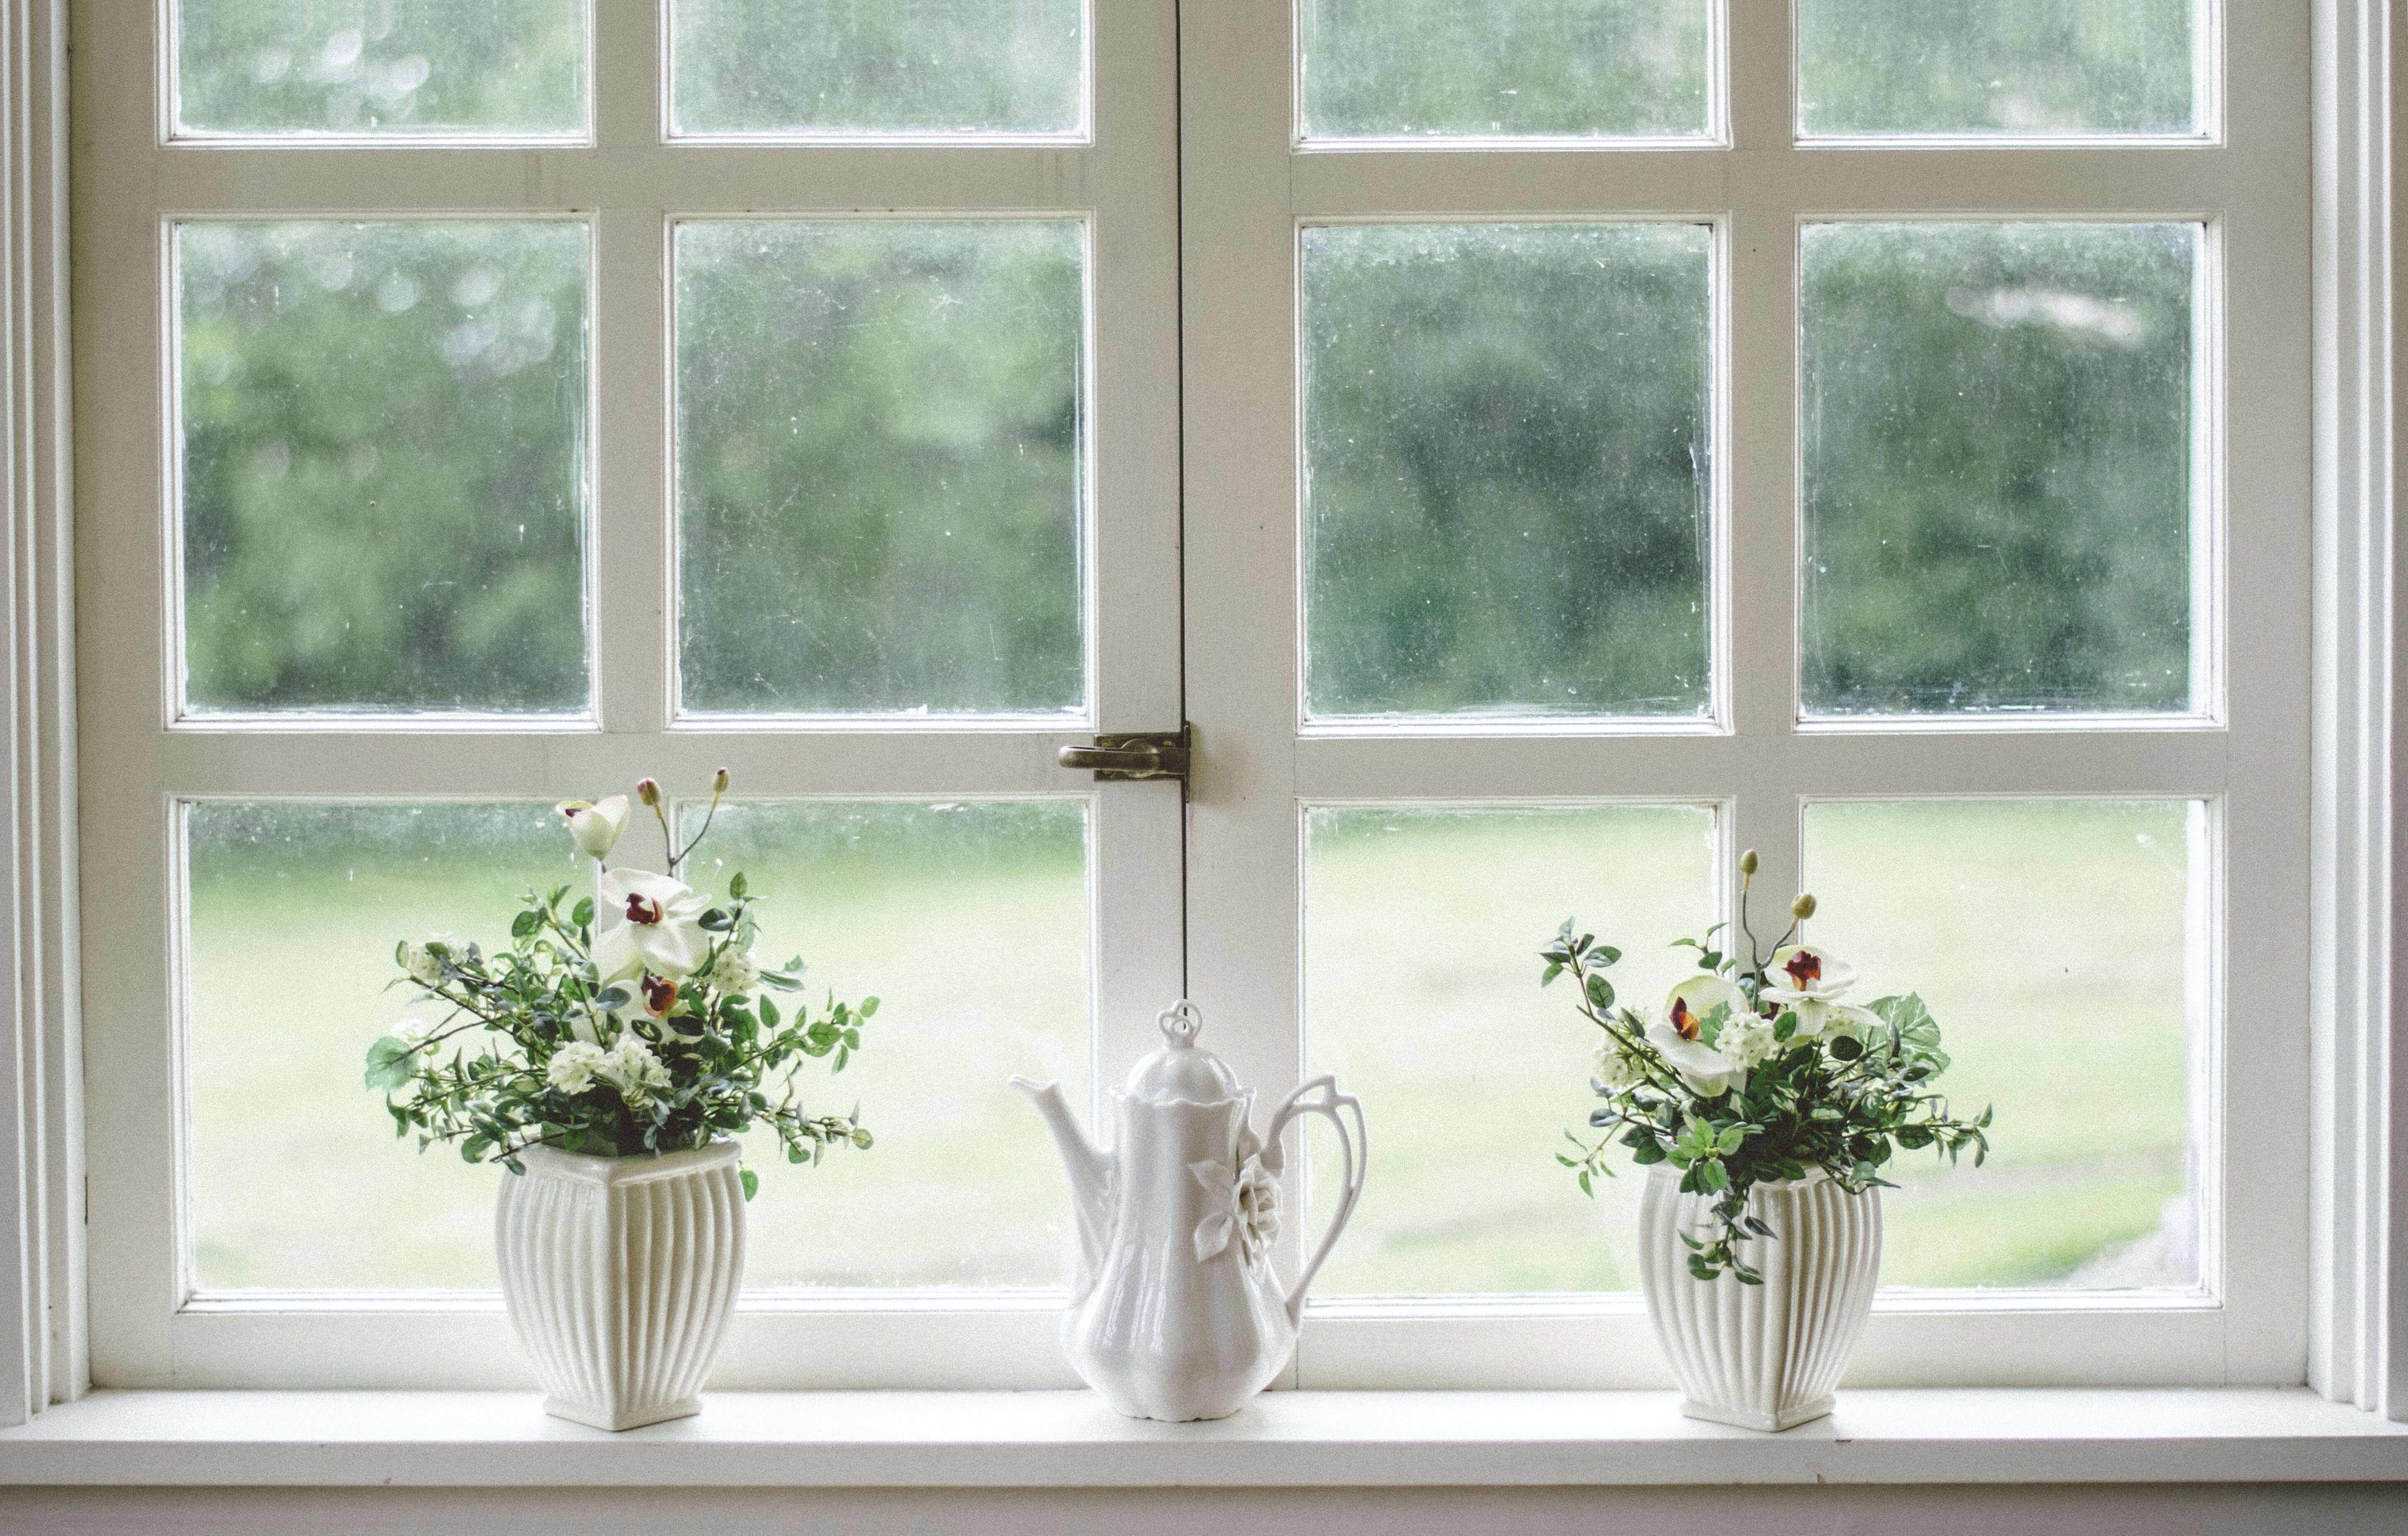 a picture of a window pane in a house looking out into the garden